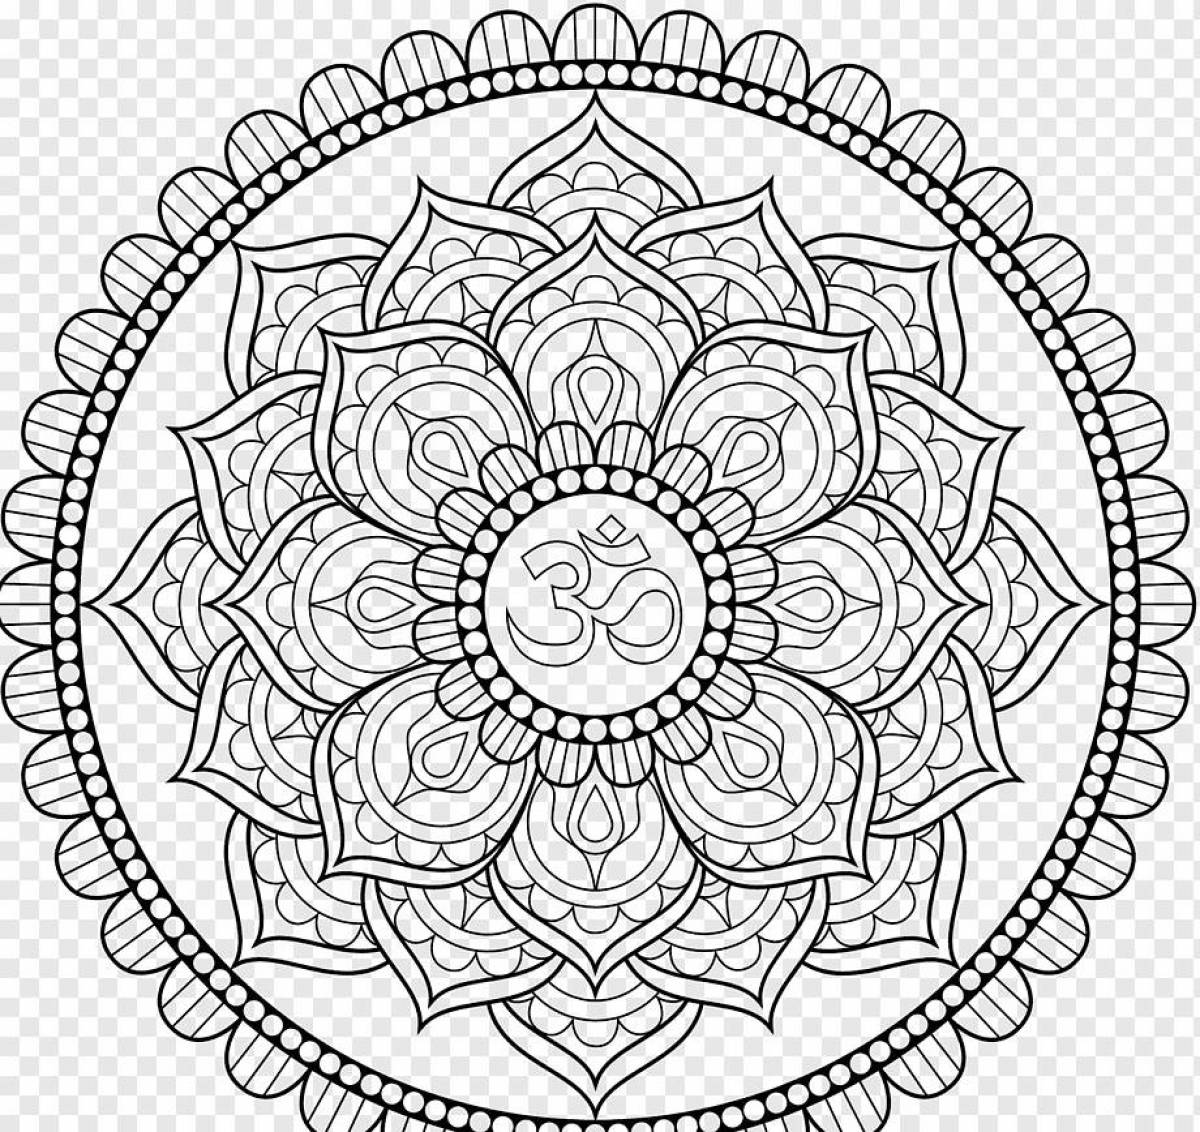 Amangast's famous coloring page